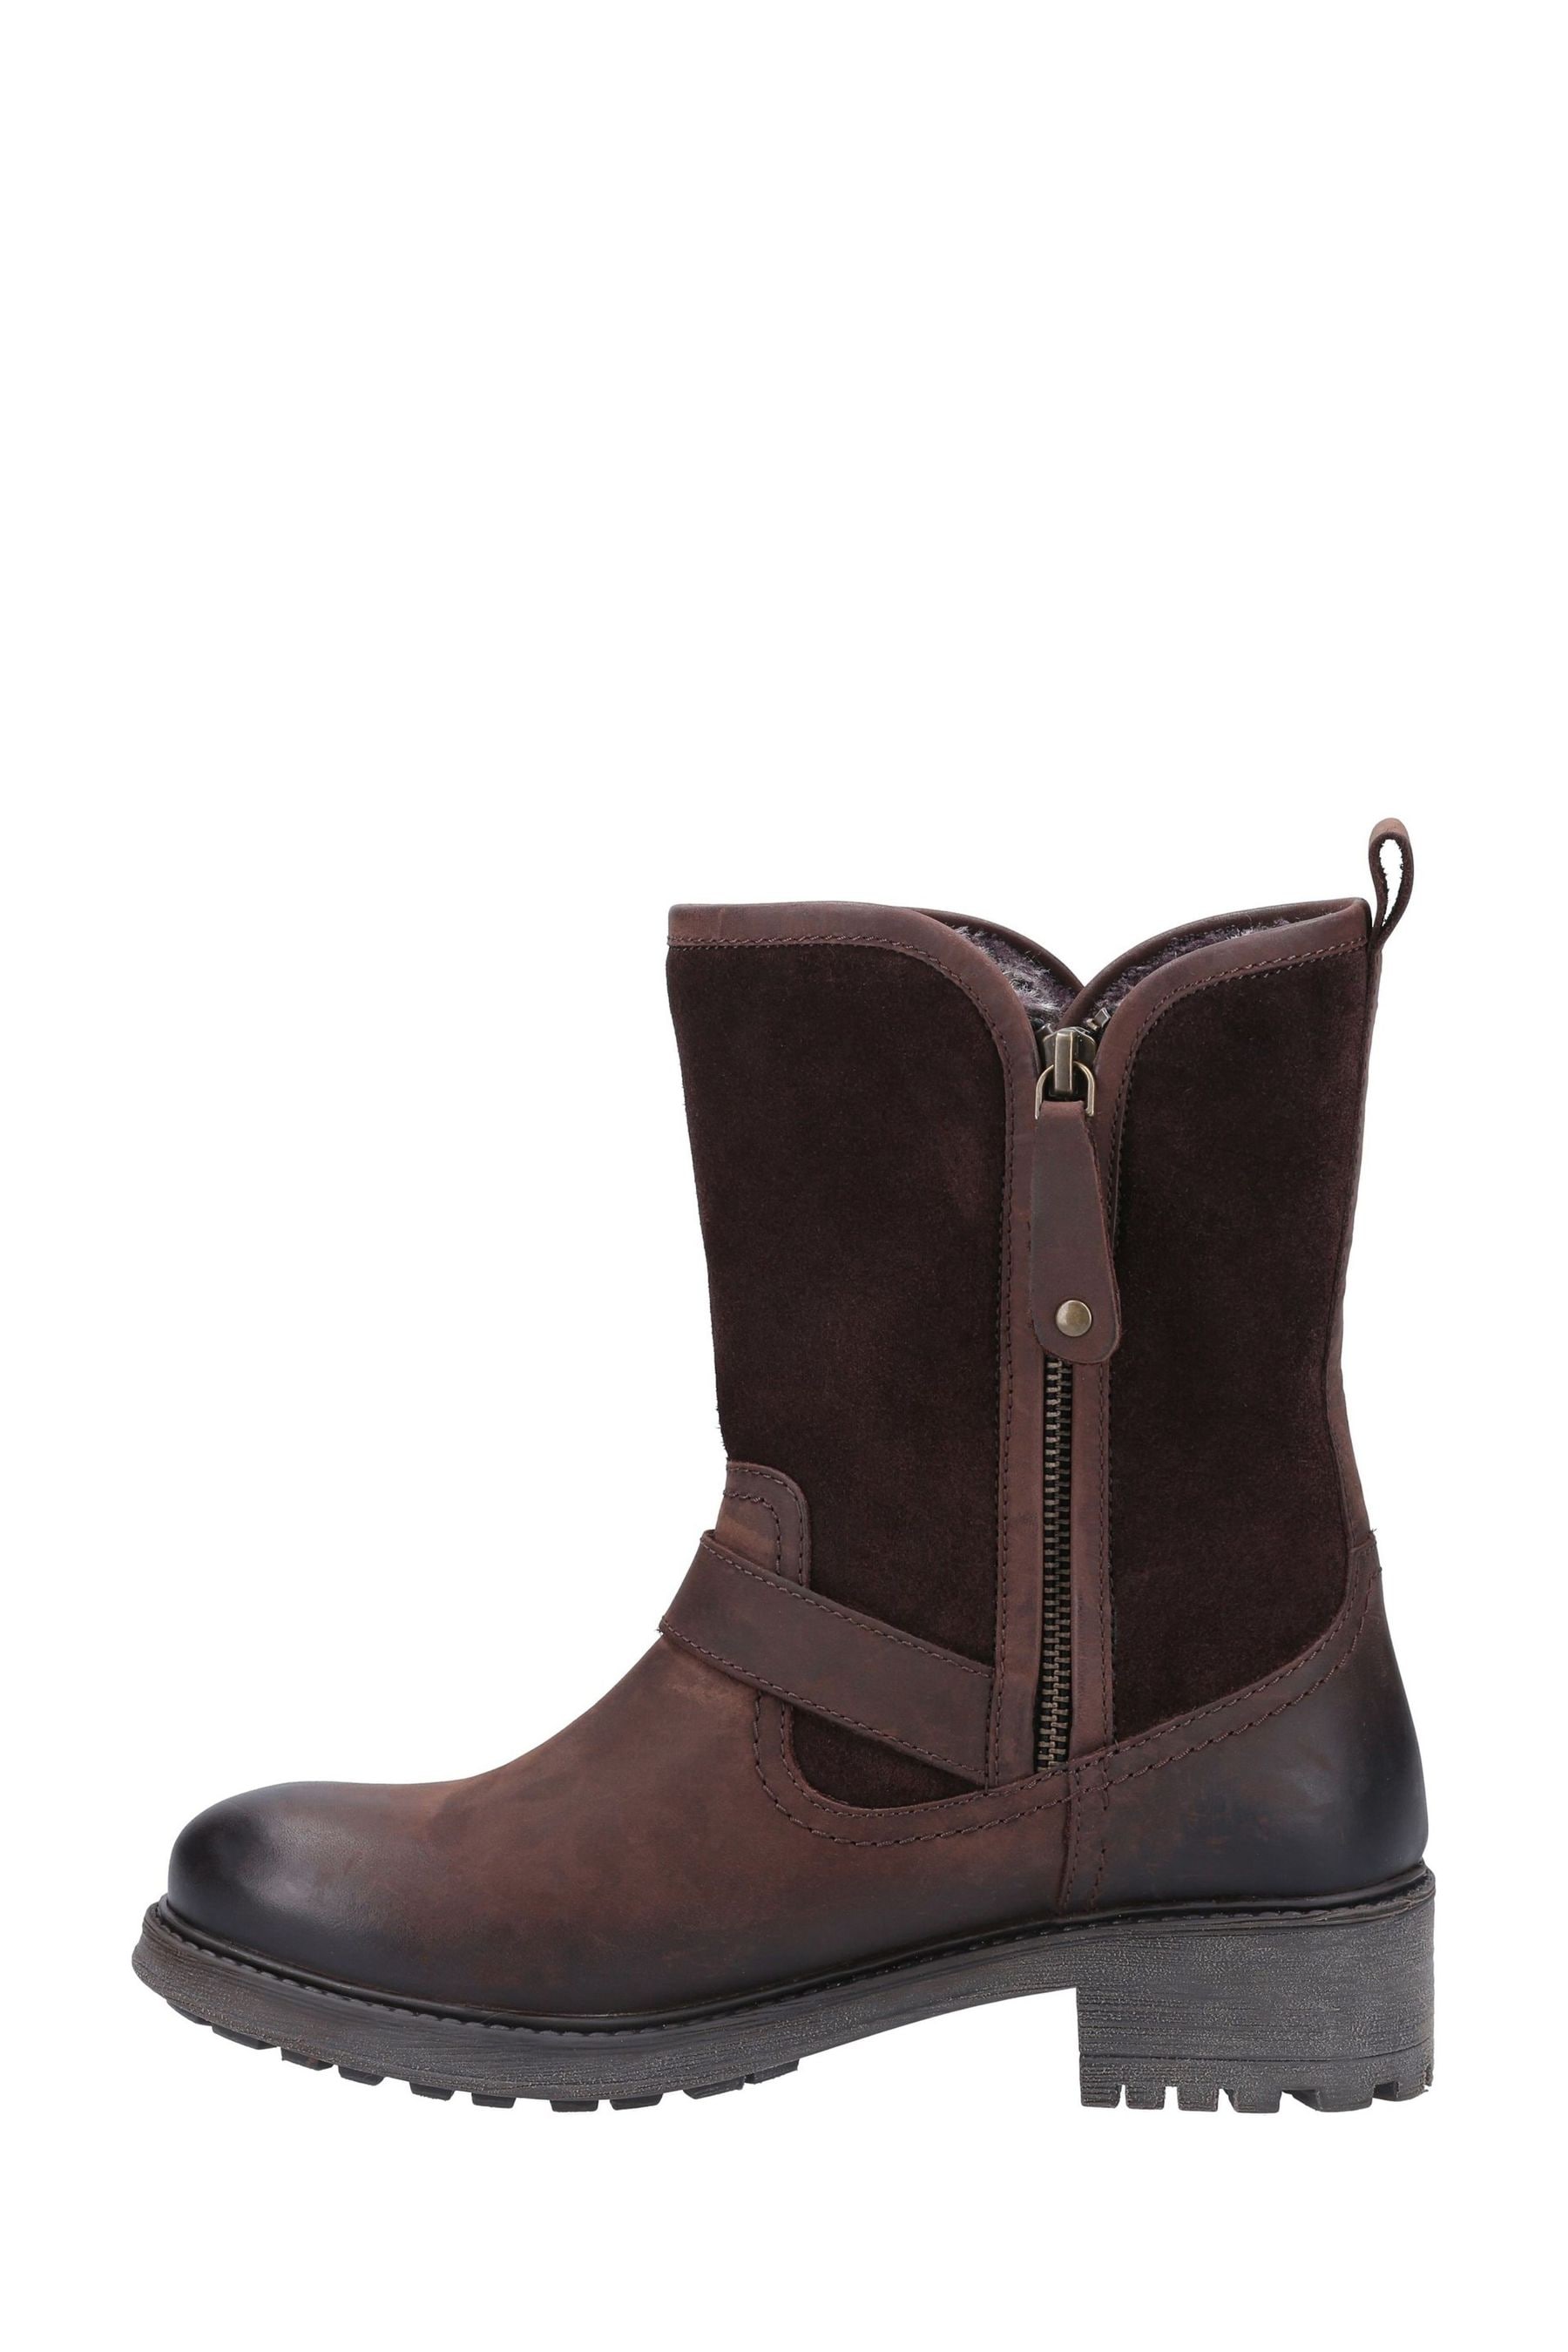 Buy Cotswold Brown Randwick Calf-Length Boots from the Next UK online shop